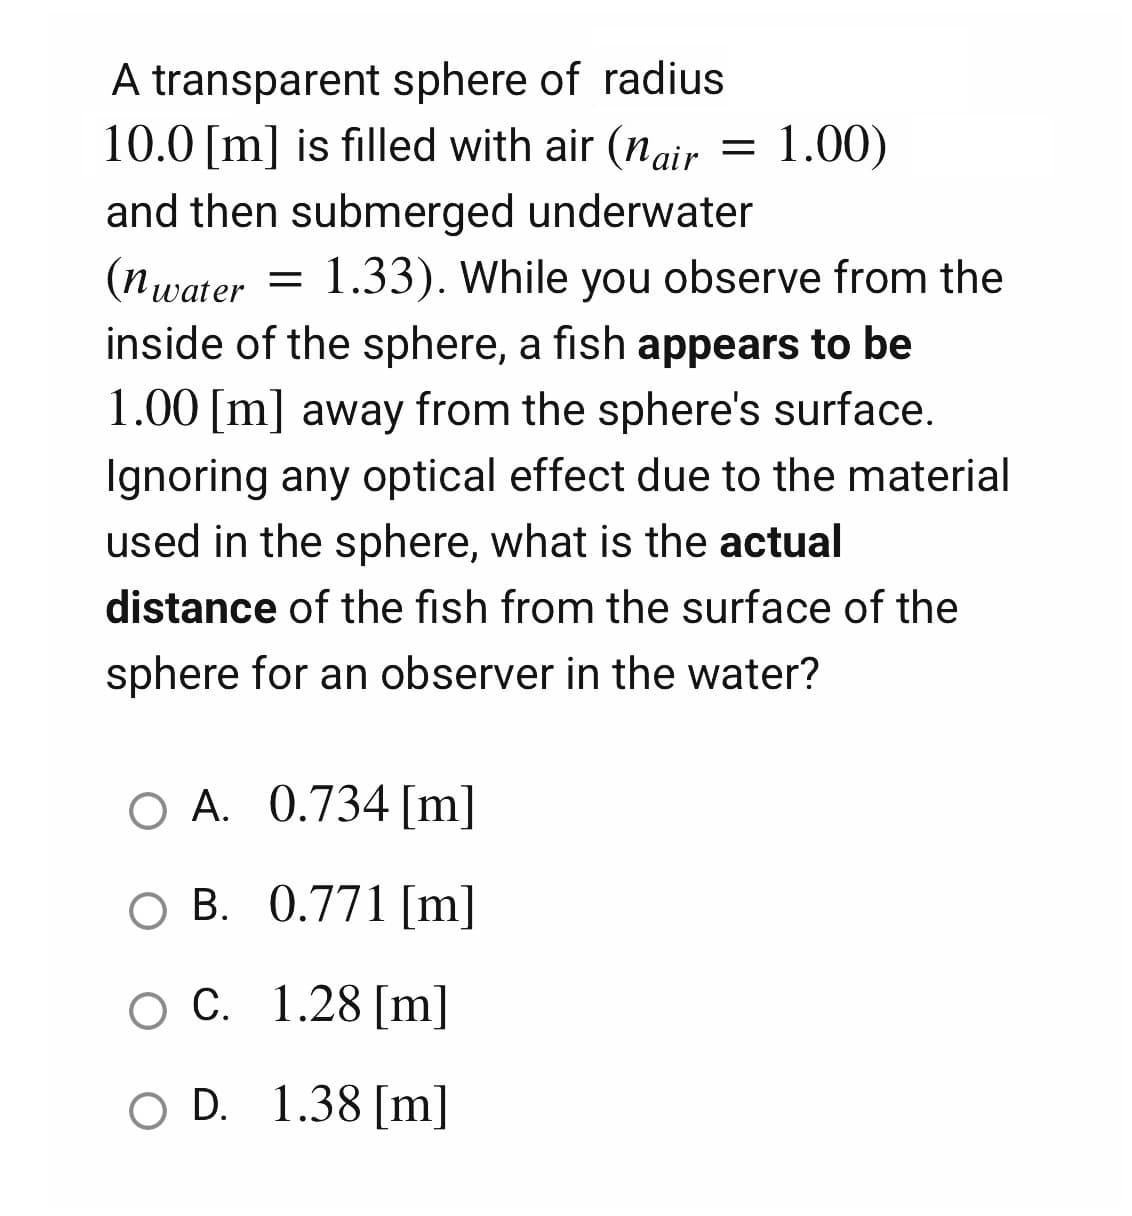 A transparent sphere of radius
10.0 [m] is filled with air (nair
=
1.00)
and then submerged underwater
(nwater = 1.33). While you observe from the
inside of the sphere, a fish appears to be
1.00 [m] away from the sphere's surface.
Ignoring any optical effect due to the material
used in the sphere, what is the actual
distance of the fish from the surface of the
sphere for an observer in the water?
O A. 0.734 [m]
O B. 0.771 [m]
O C. 1.28 [m]
O D. 1.38 [m]